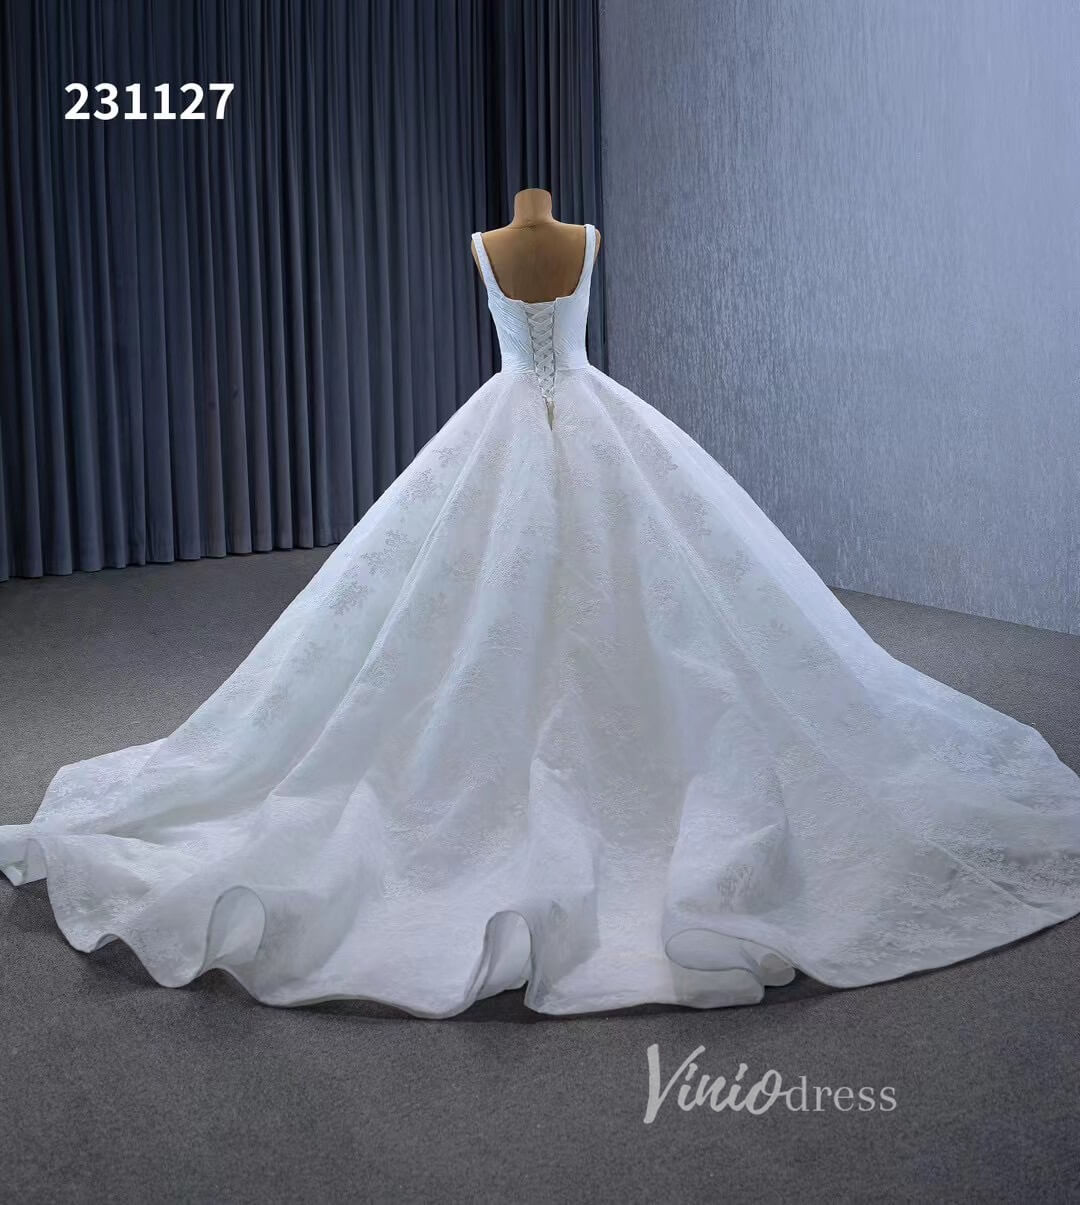 Luxury White Lace Ball Gown Wedding Dresses Corset Back 231127-wedding dresses-Viniodress-Viniodress